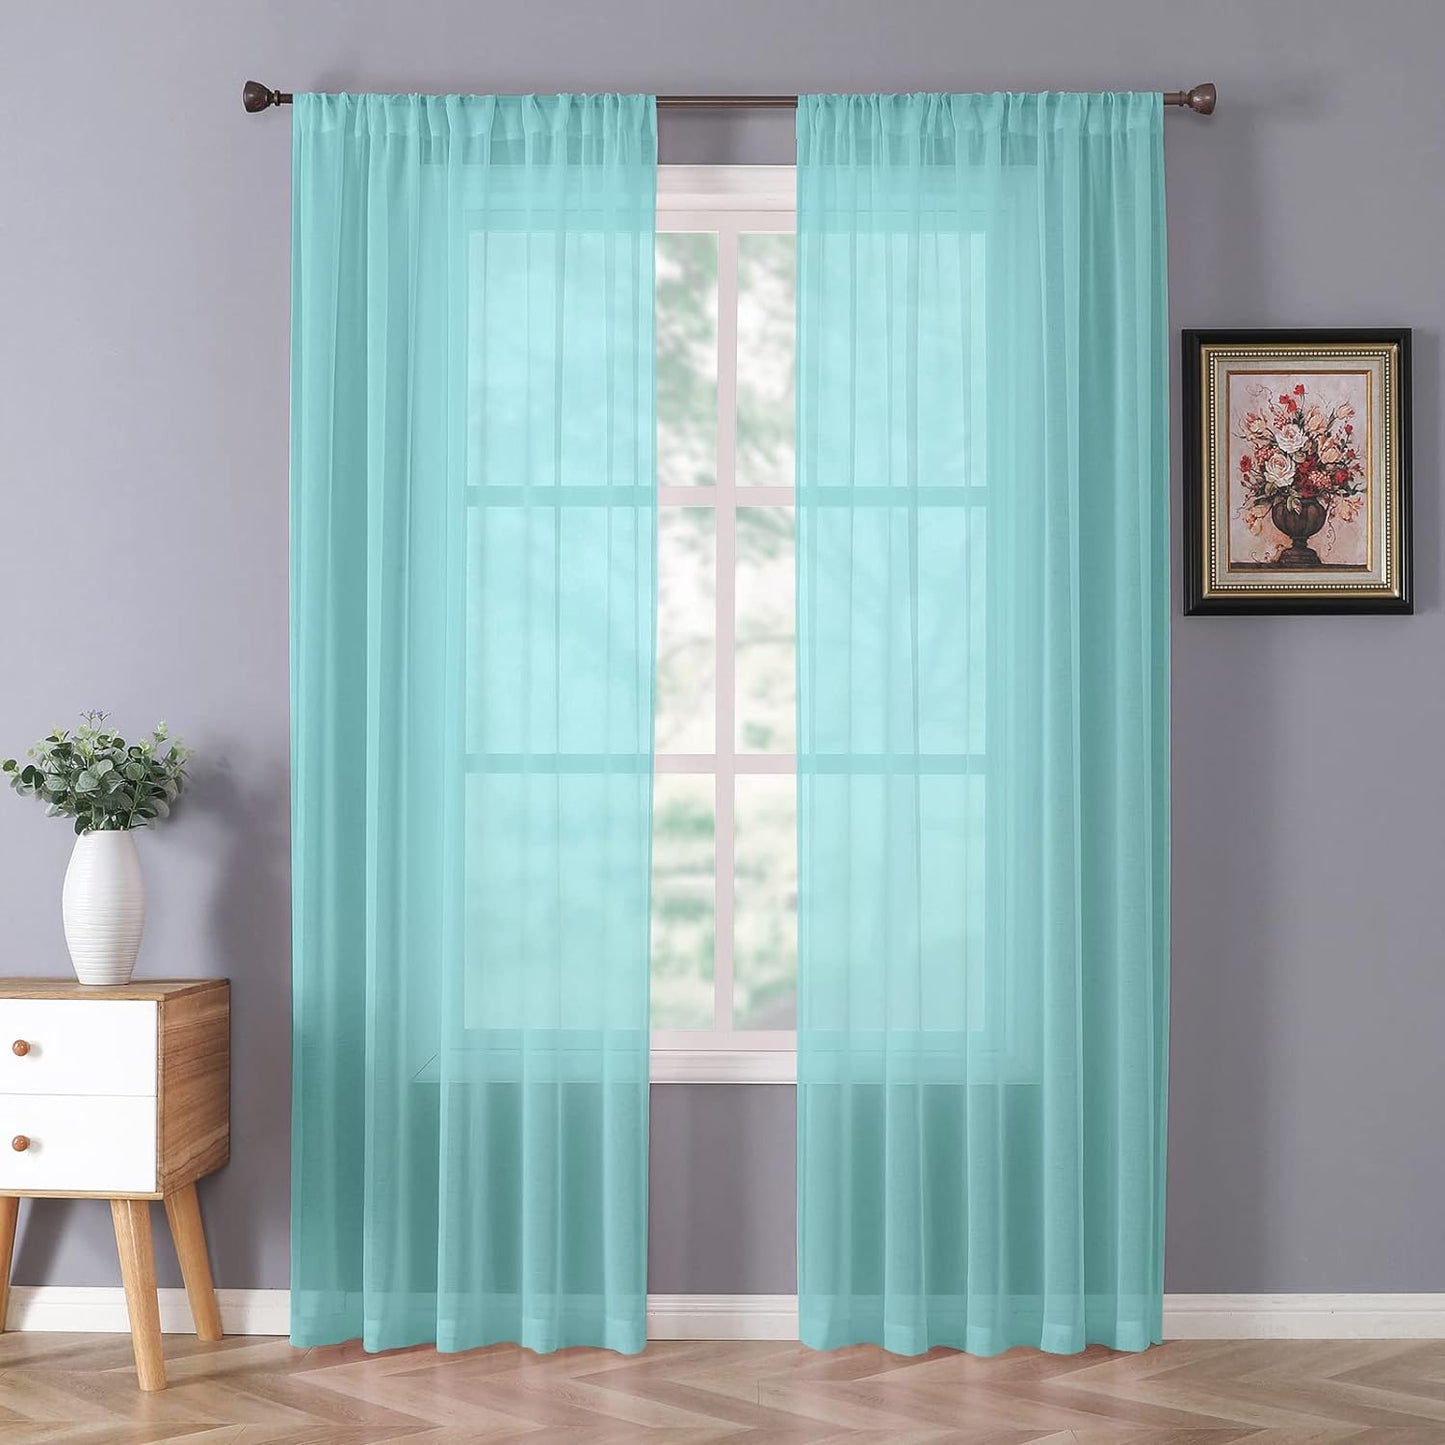 Tollpiz Short Sheer Curtains Linen Textured Bedroom Curtain Sheers Light Filtering Rod Pocket Voile Curtains for Living Room, 54 X 45 Inches Long, White, Set of 2 Panels  Tollpiz Tex Crystal Blue 54"W X 72"L 